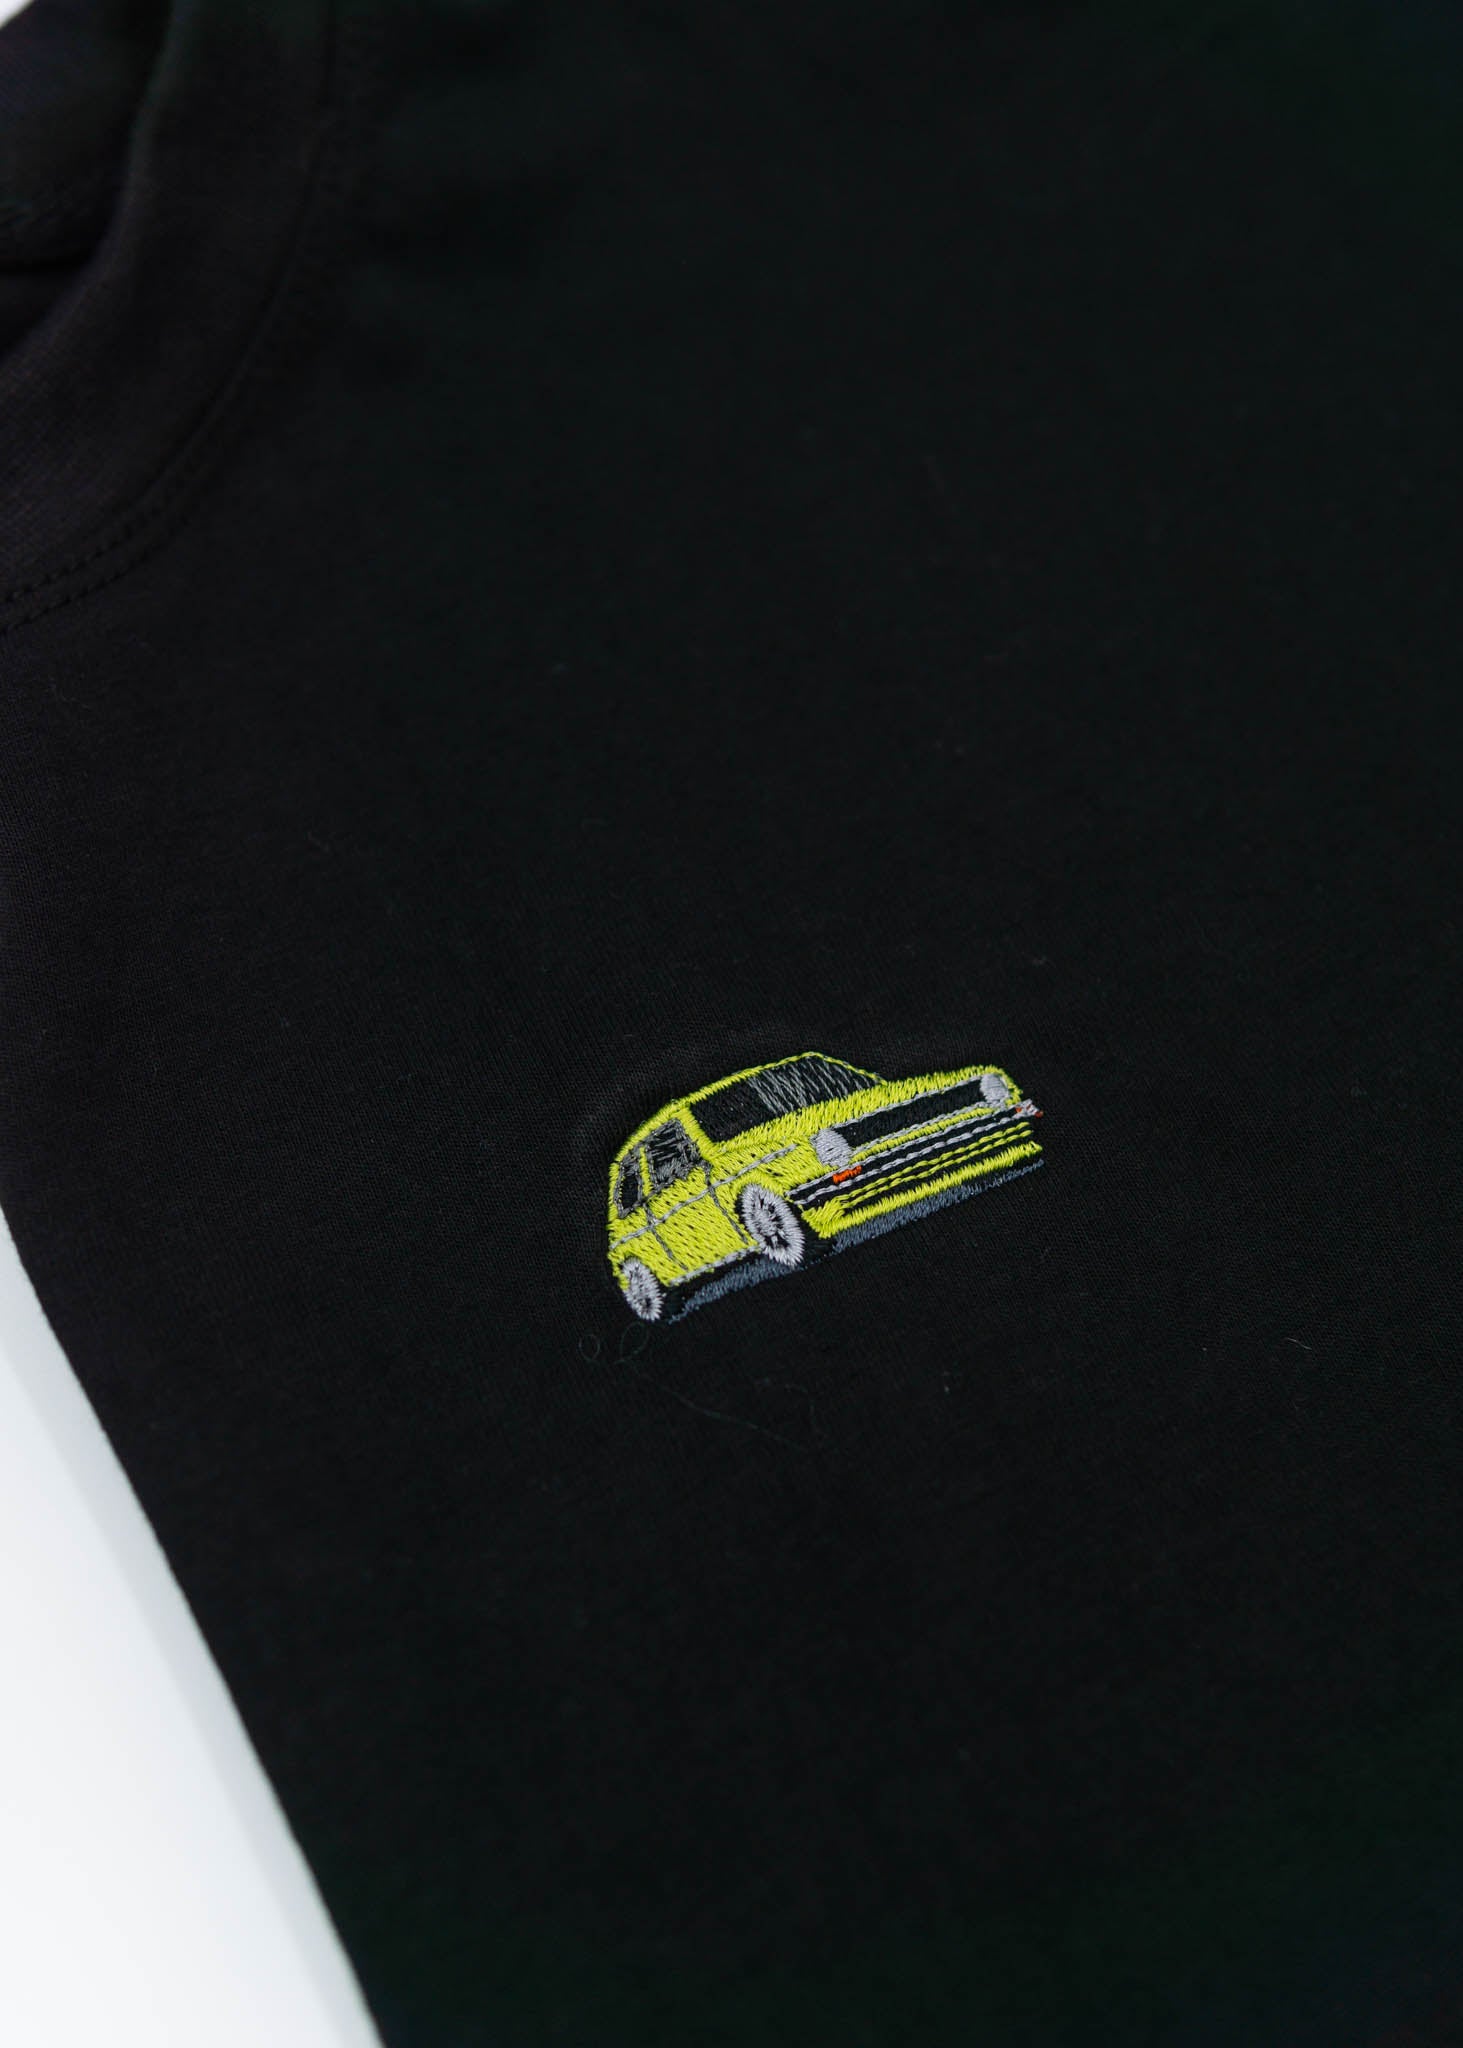 A black cropped t-shirt for VW women and plus size women. Close up of a 100% cotton crop tee with an embroidered VW Mk1 Golf. The material is stretchy, and non-transparent with a crewneck neckline and short sleeves.